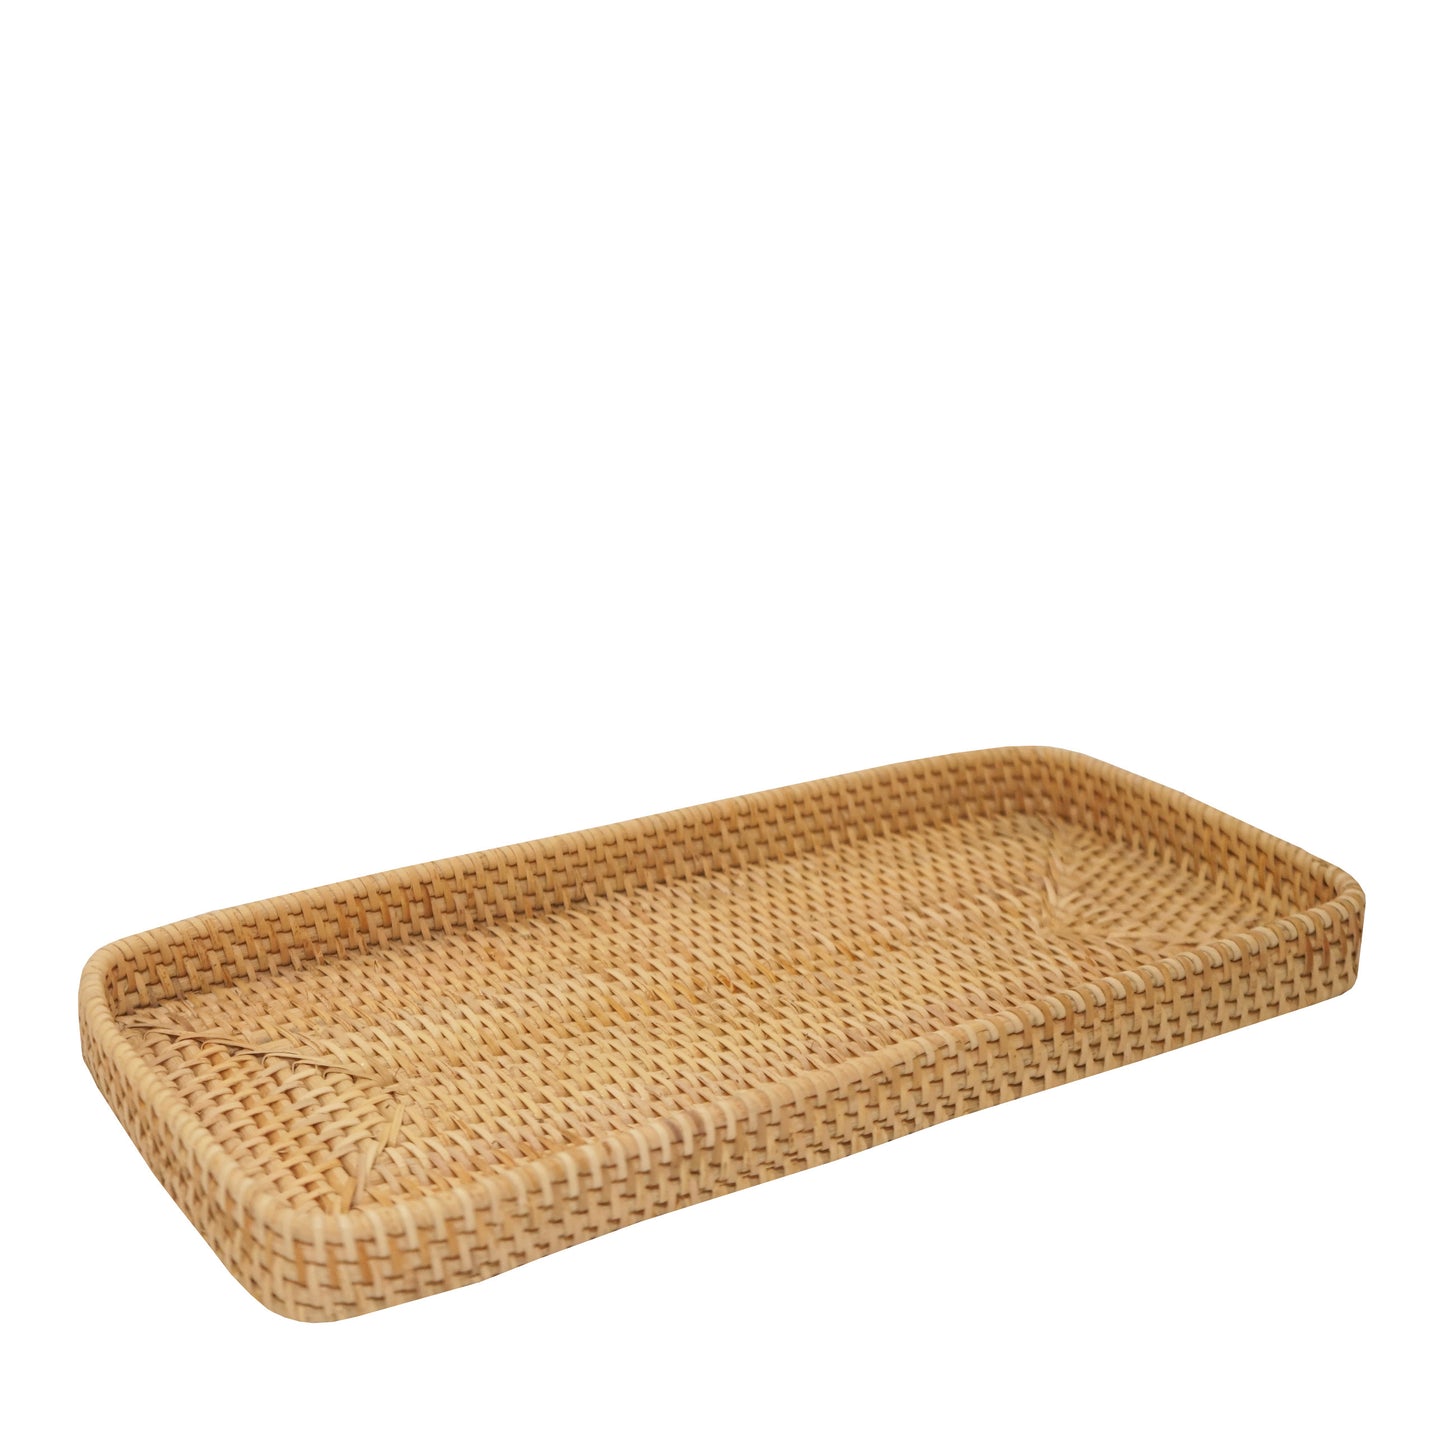 Rattan Container Hampers by Riani Rattan